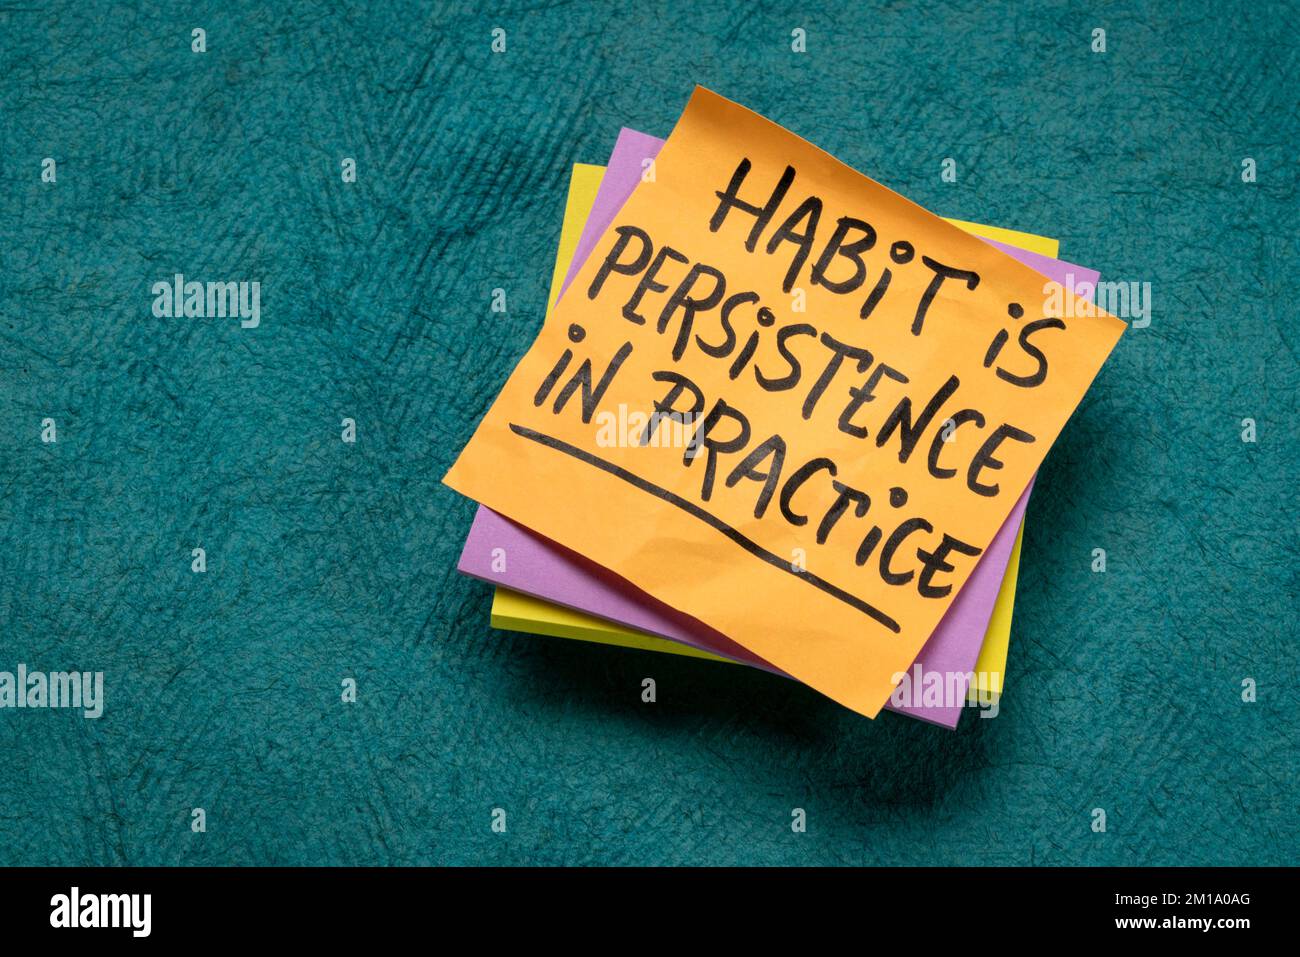 habit is a persistence in practice - inspirational reminder note, personal development concept Stock Photo